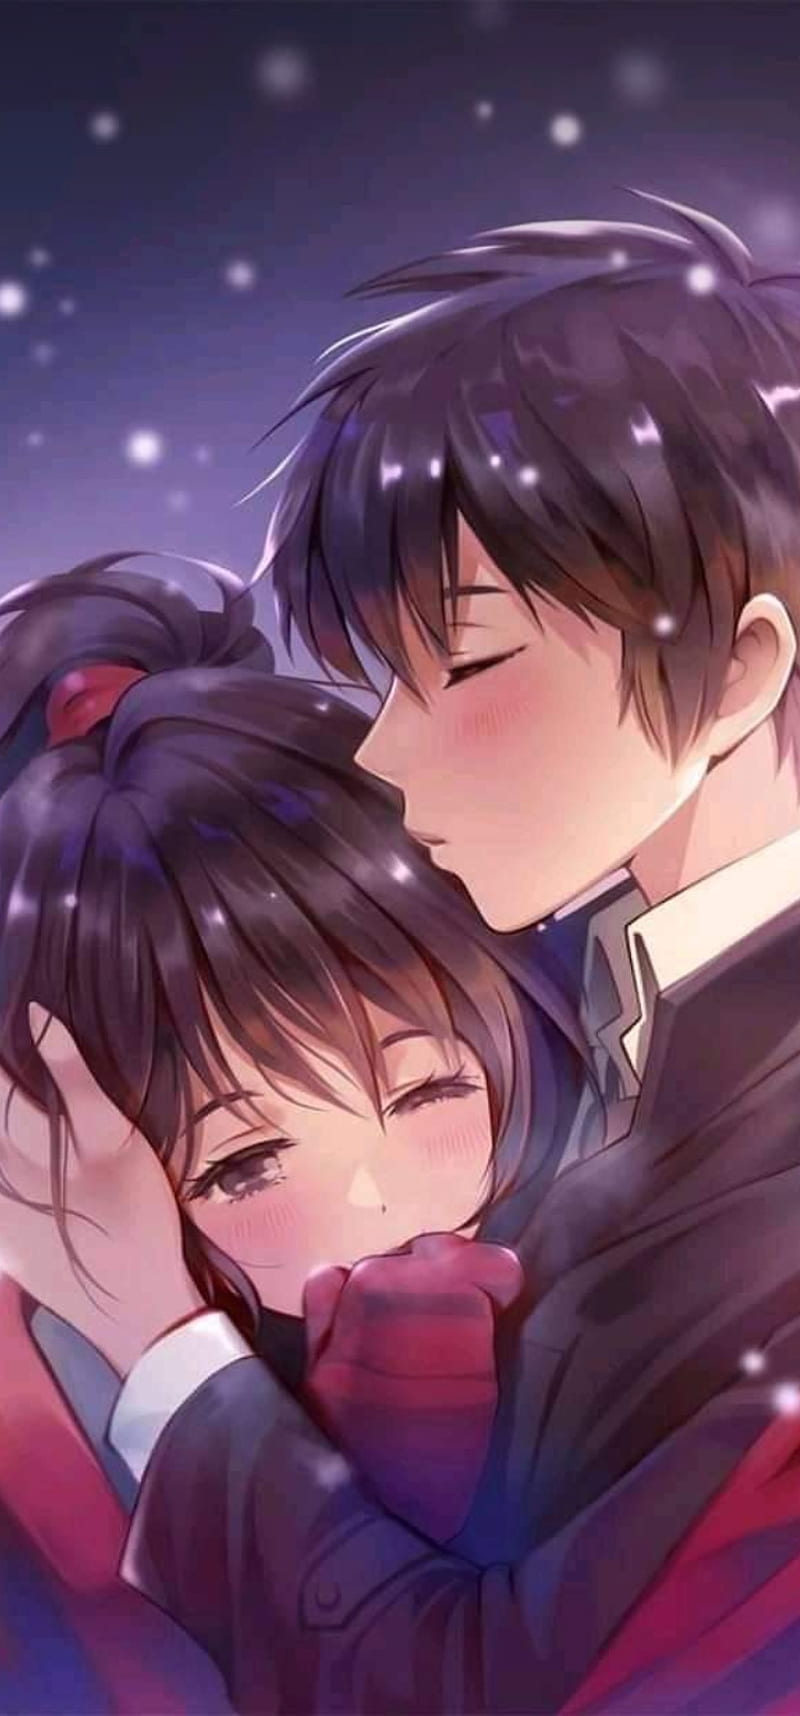 Love is Real — I really miss these kinds of romance anime from...